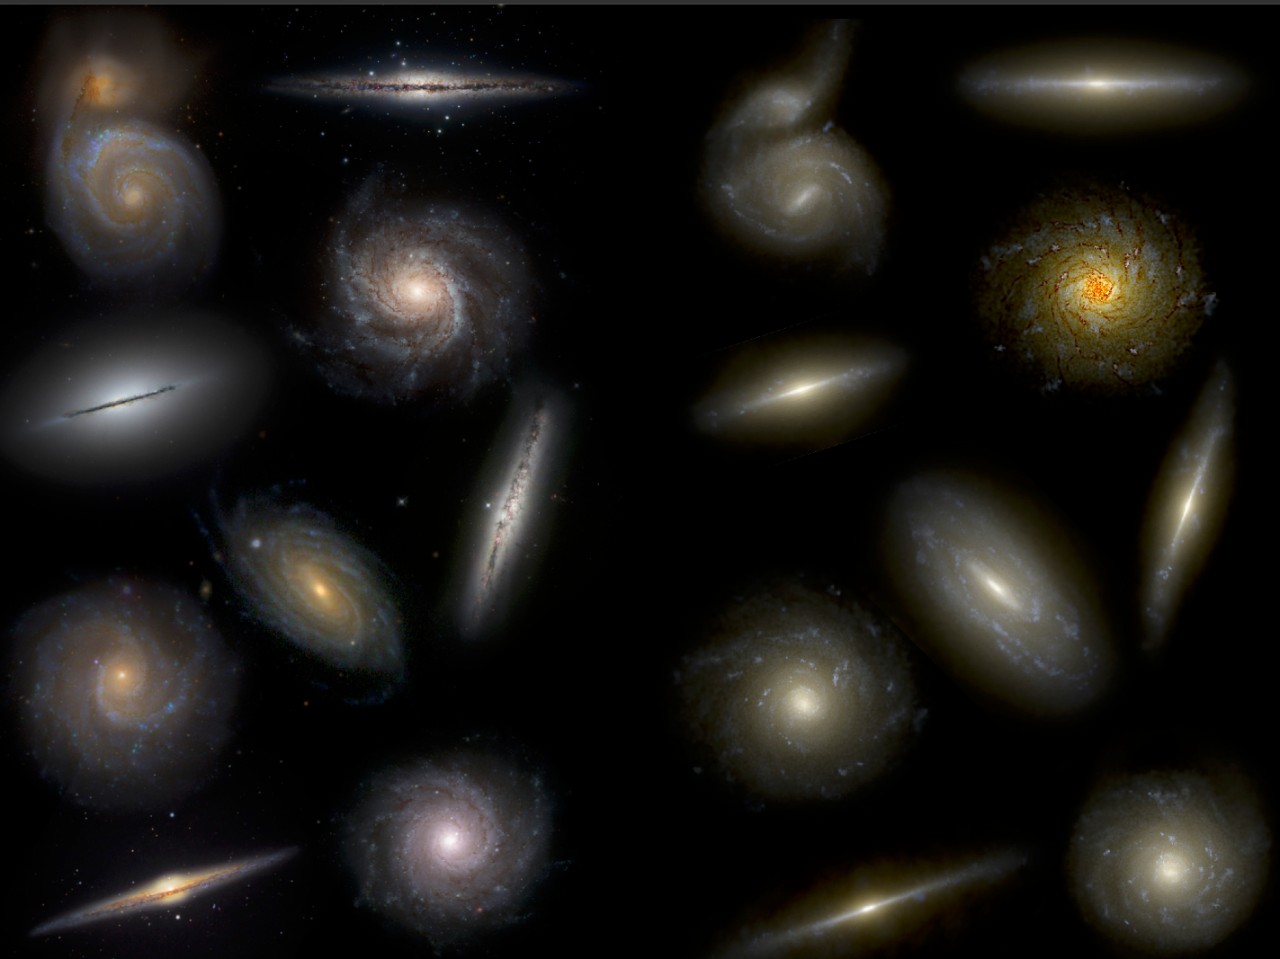 Visual comparison of real (left) and simulated (right) galaxies of different morphologies. Credit: T. Buck (PhD thesis), based on NIHAO simulations (PI: Andrea V. Macciò).